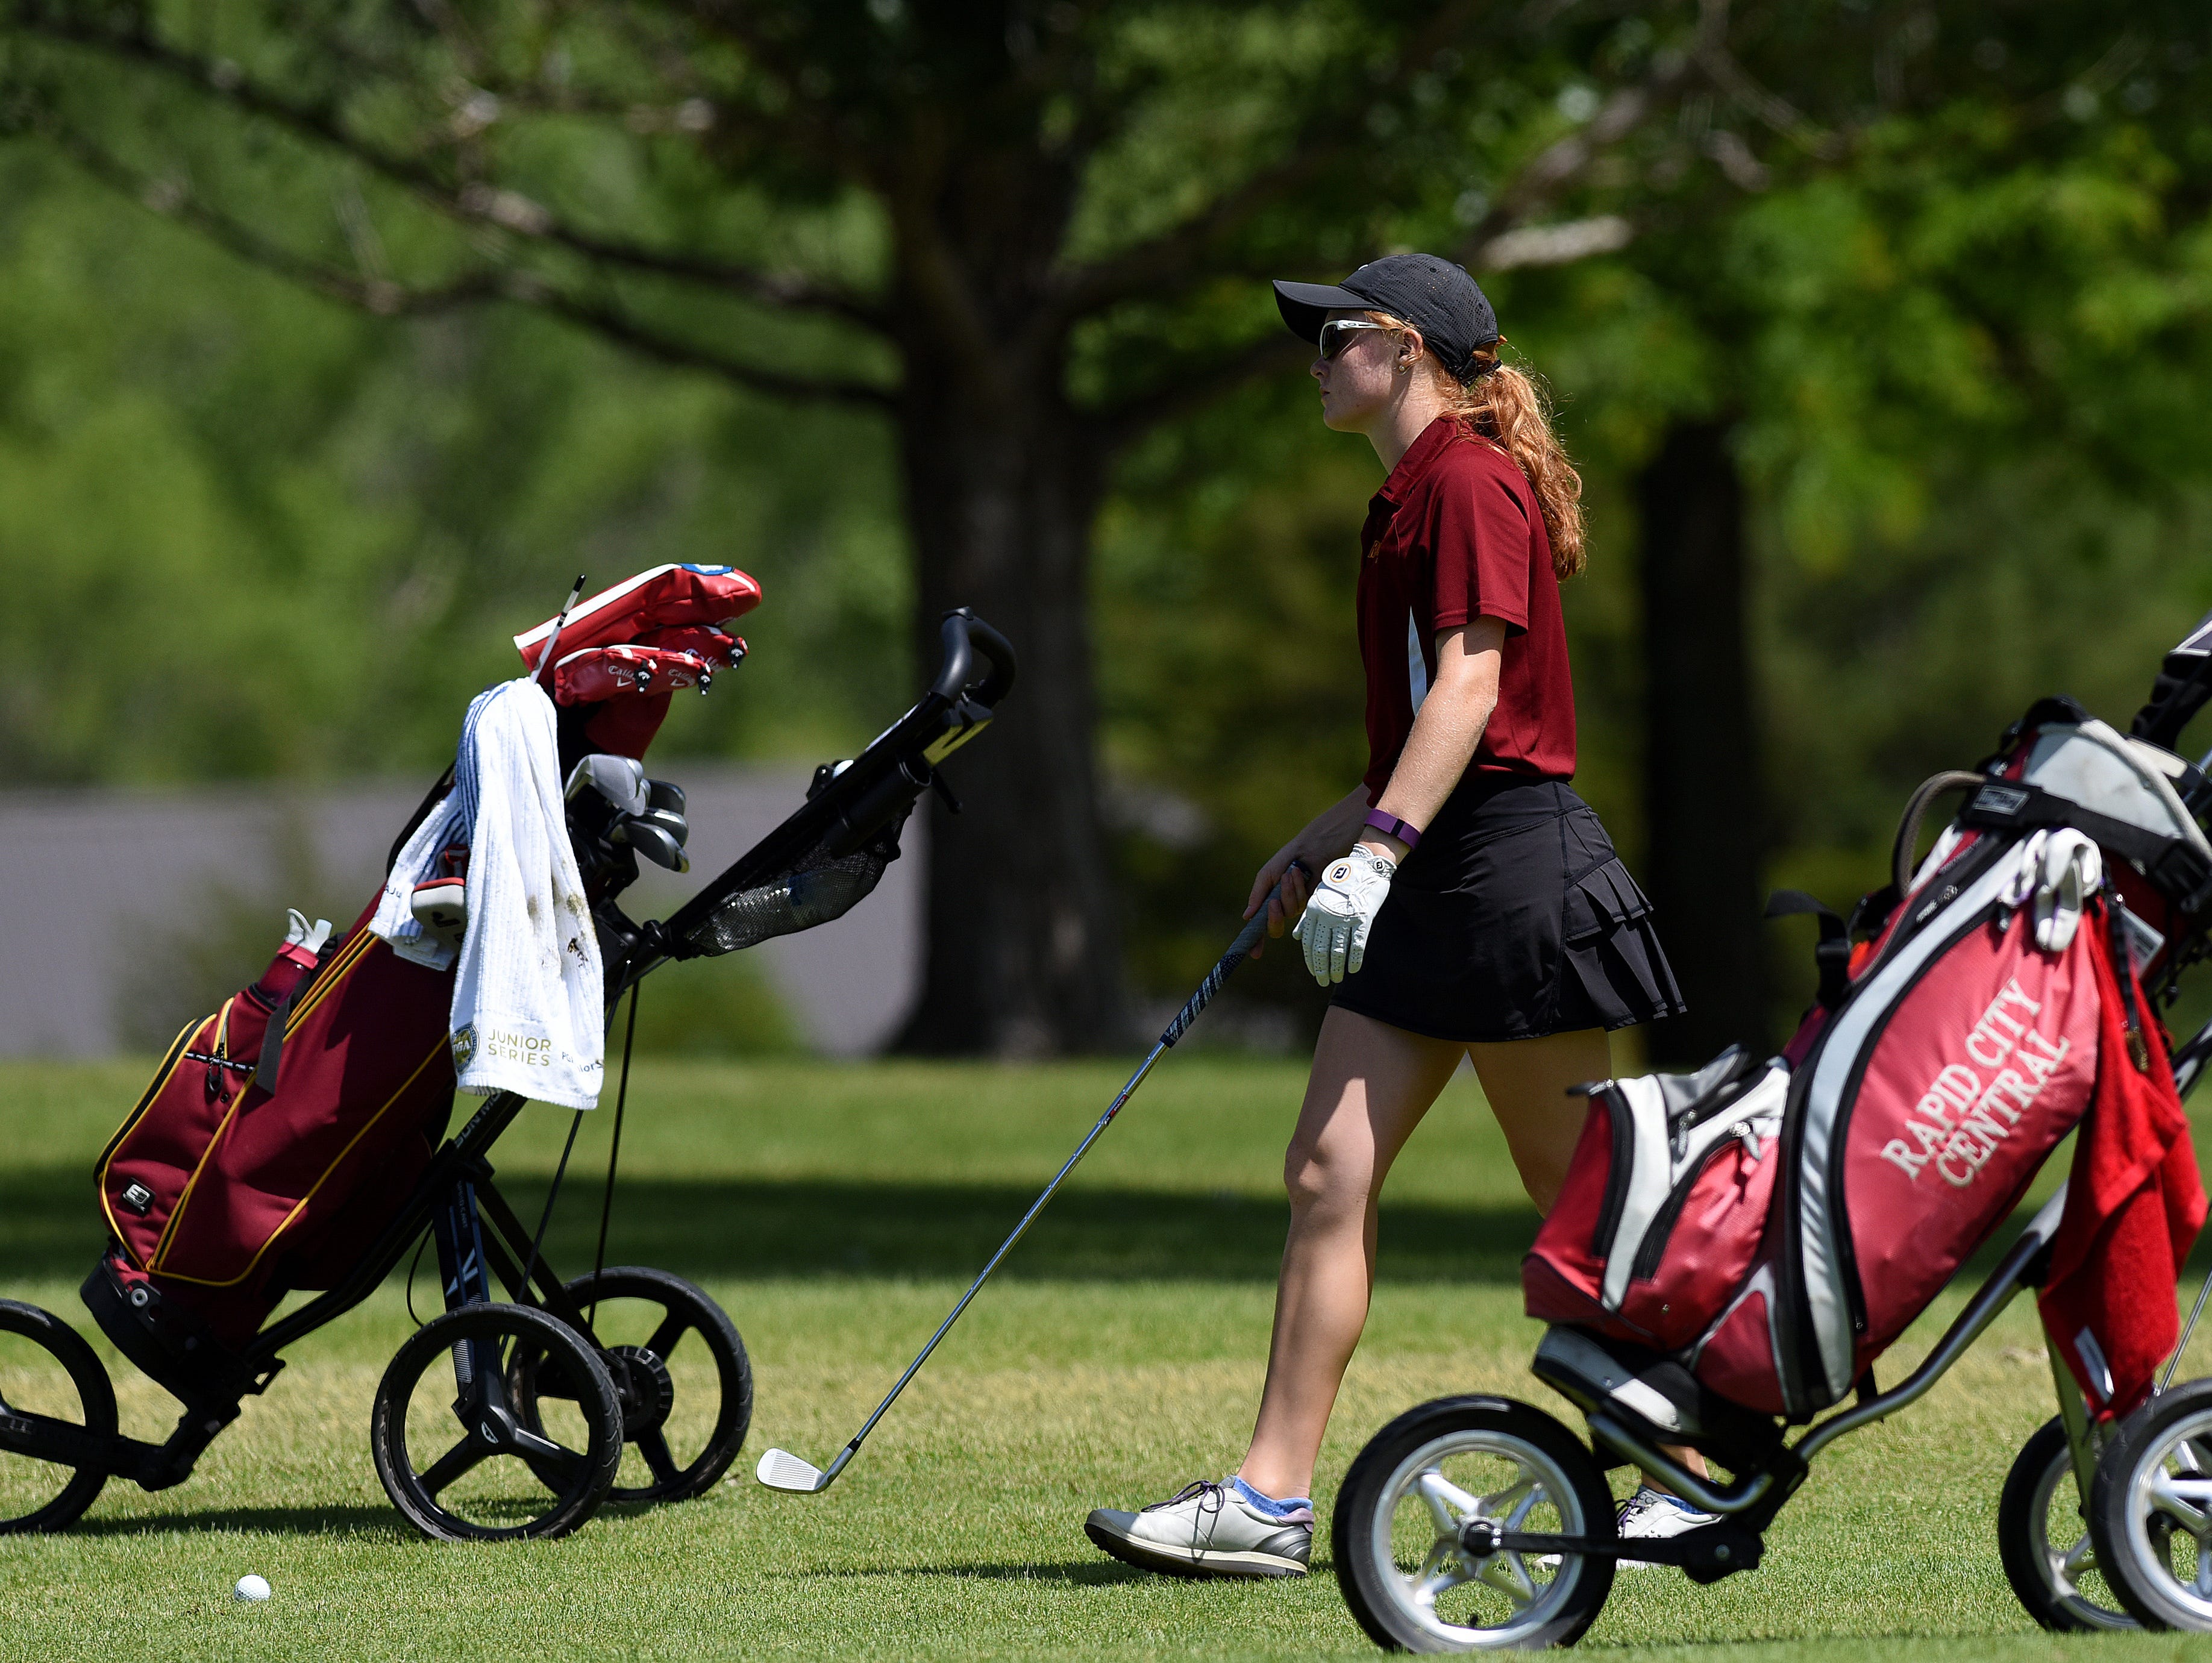 Roosevelt's McKayla Poppens golfs during the girls state golf tournament at Lakeview Golf Course in Mitchell, S.D., Tuesday, June 7, 2016.